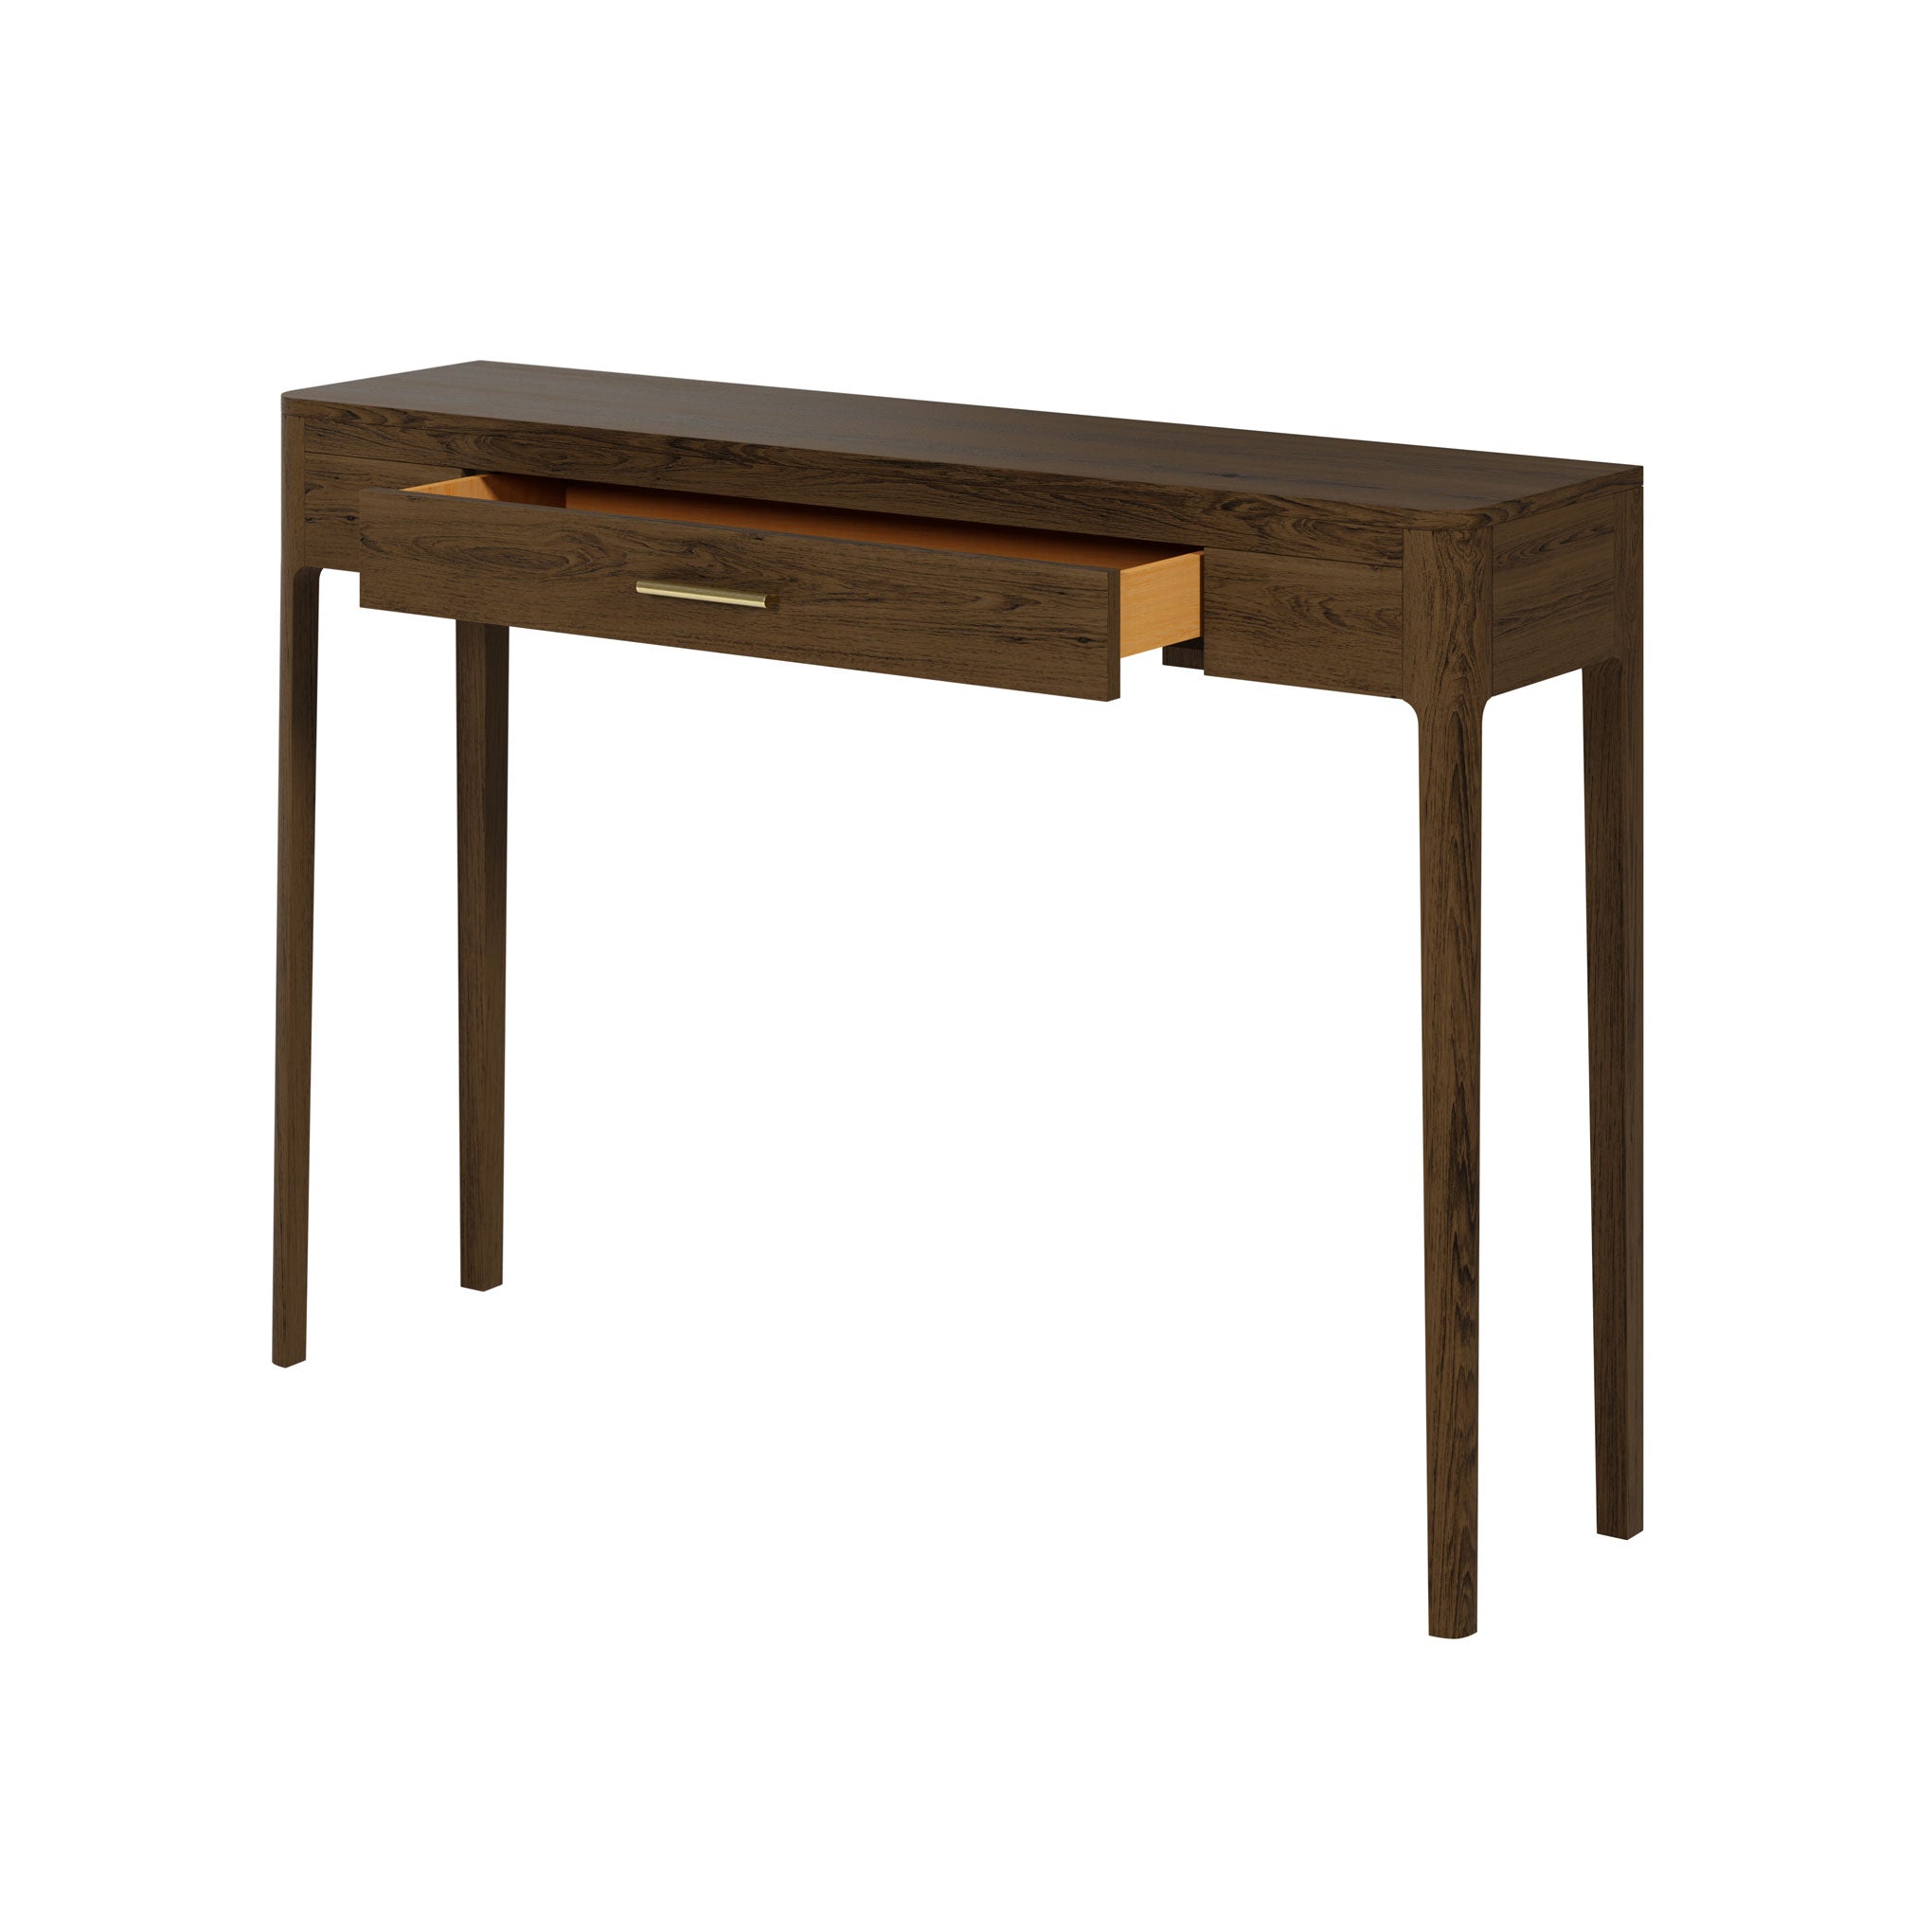 Abberley Console Brown